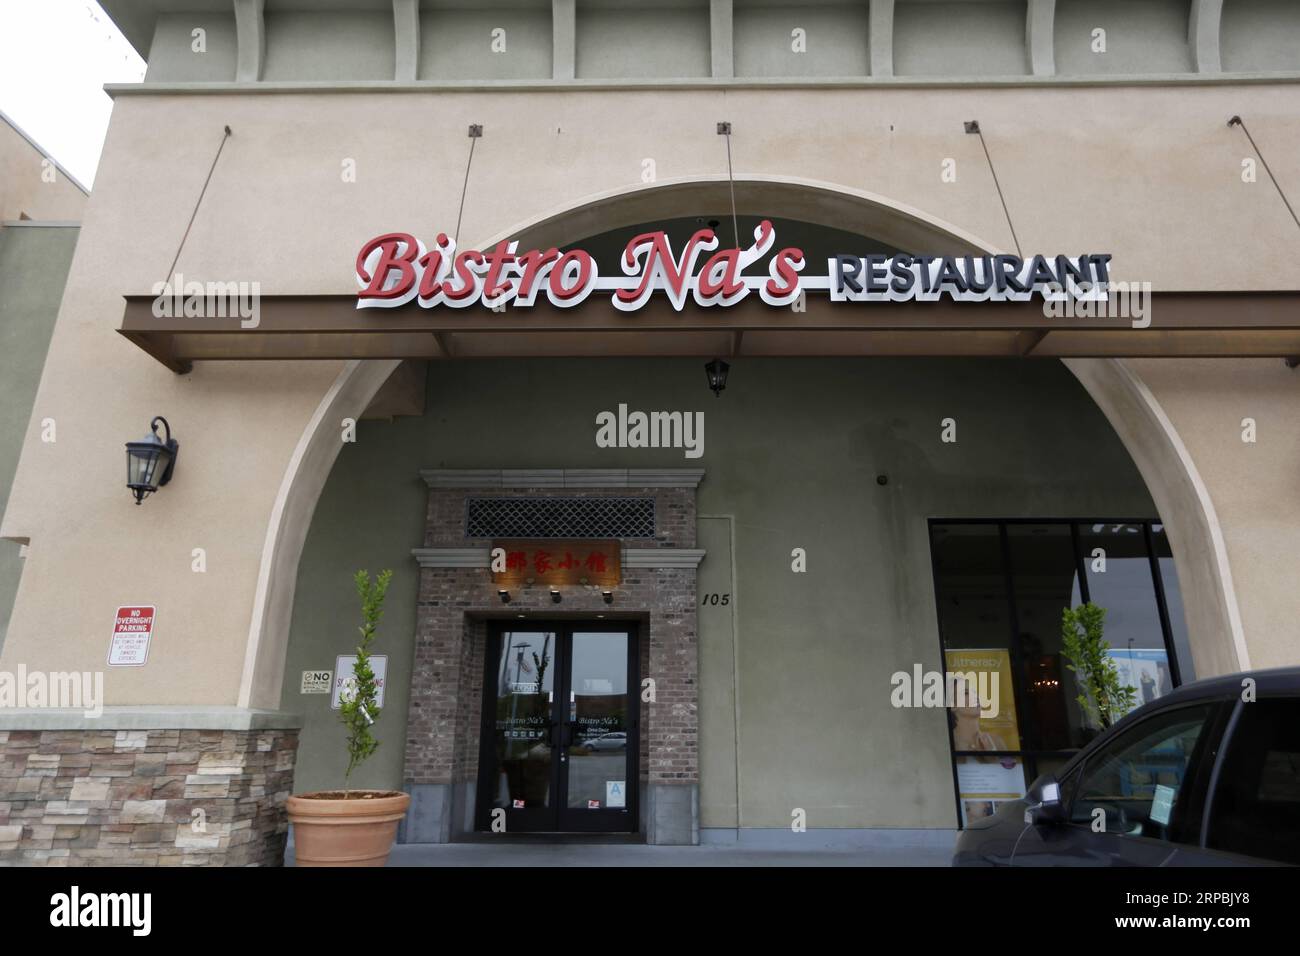 (190610) -- LOS ANGELES, June 10, 2019 (Xinhua) -- Photo taken on June 7, 2019 shows the exterior view of Bistro Na s in Temple City, Los Angeles, the United States. Bistro Na s in Los Angeles made headlines this week with the announcement that it had been awarded a coveted Michelin Star by the famed Michelin Restaurant Guide. This special ranking broke Michelin s 10-year absence from Los Angeles, and made Bistro Na s the only Chinese restaurant in Southern California to be so honored. (Xinhua/Li Ying) U.S.-LOS ANGELES-CHINESE CUISINE-BISTRO NA S PUBLICATIONxNOTxINxCHN Stock Photo